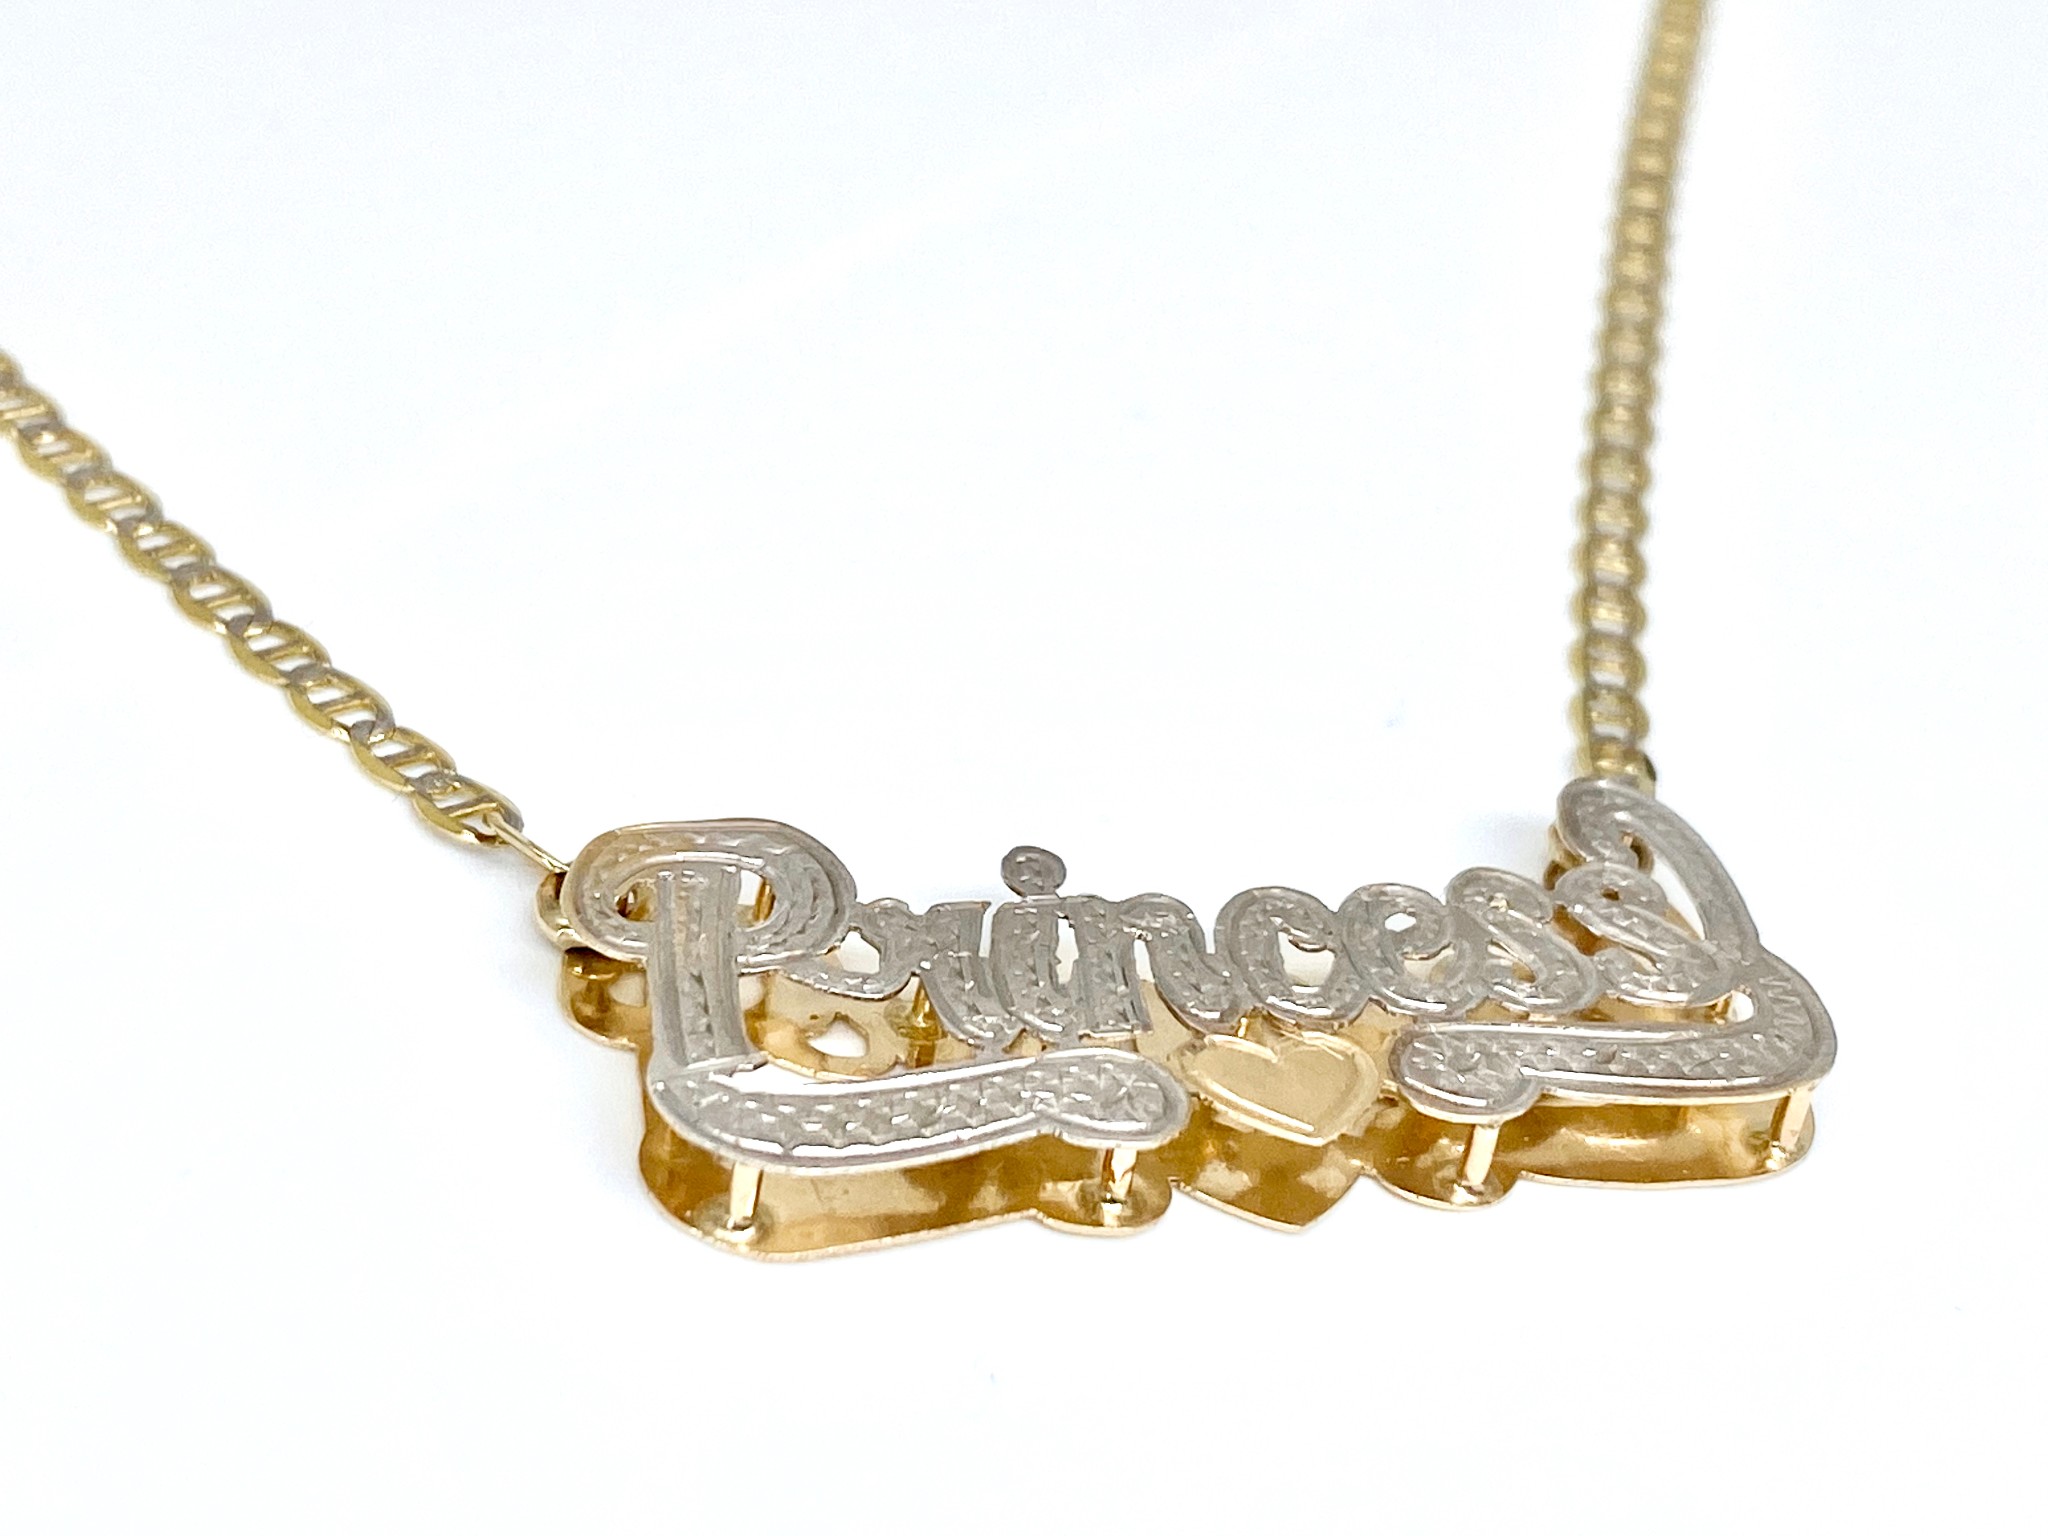 10K Real Yellow Gold Personalized Name Plate/Tag Nameplate Chain/Necklace Double | eBay